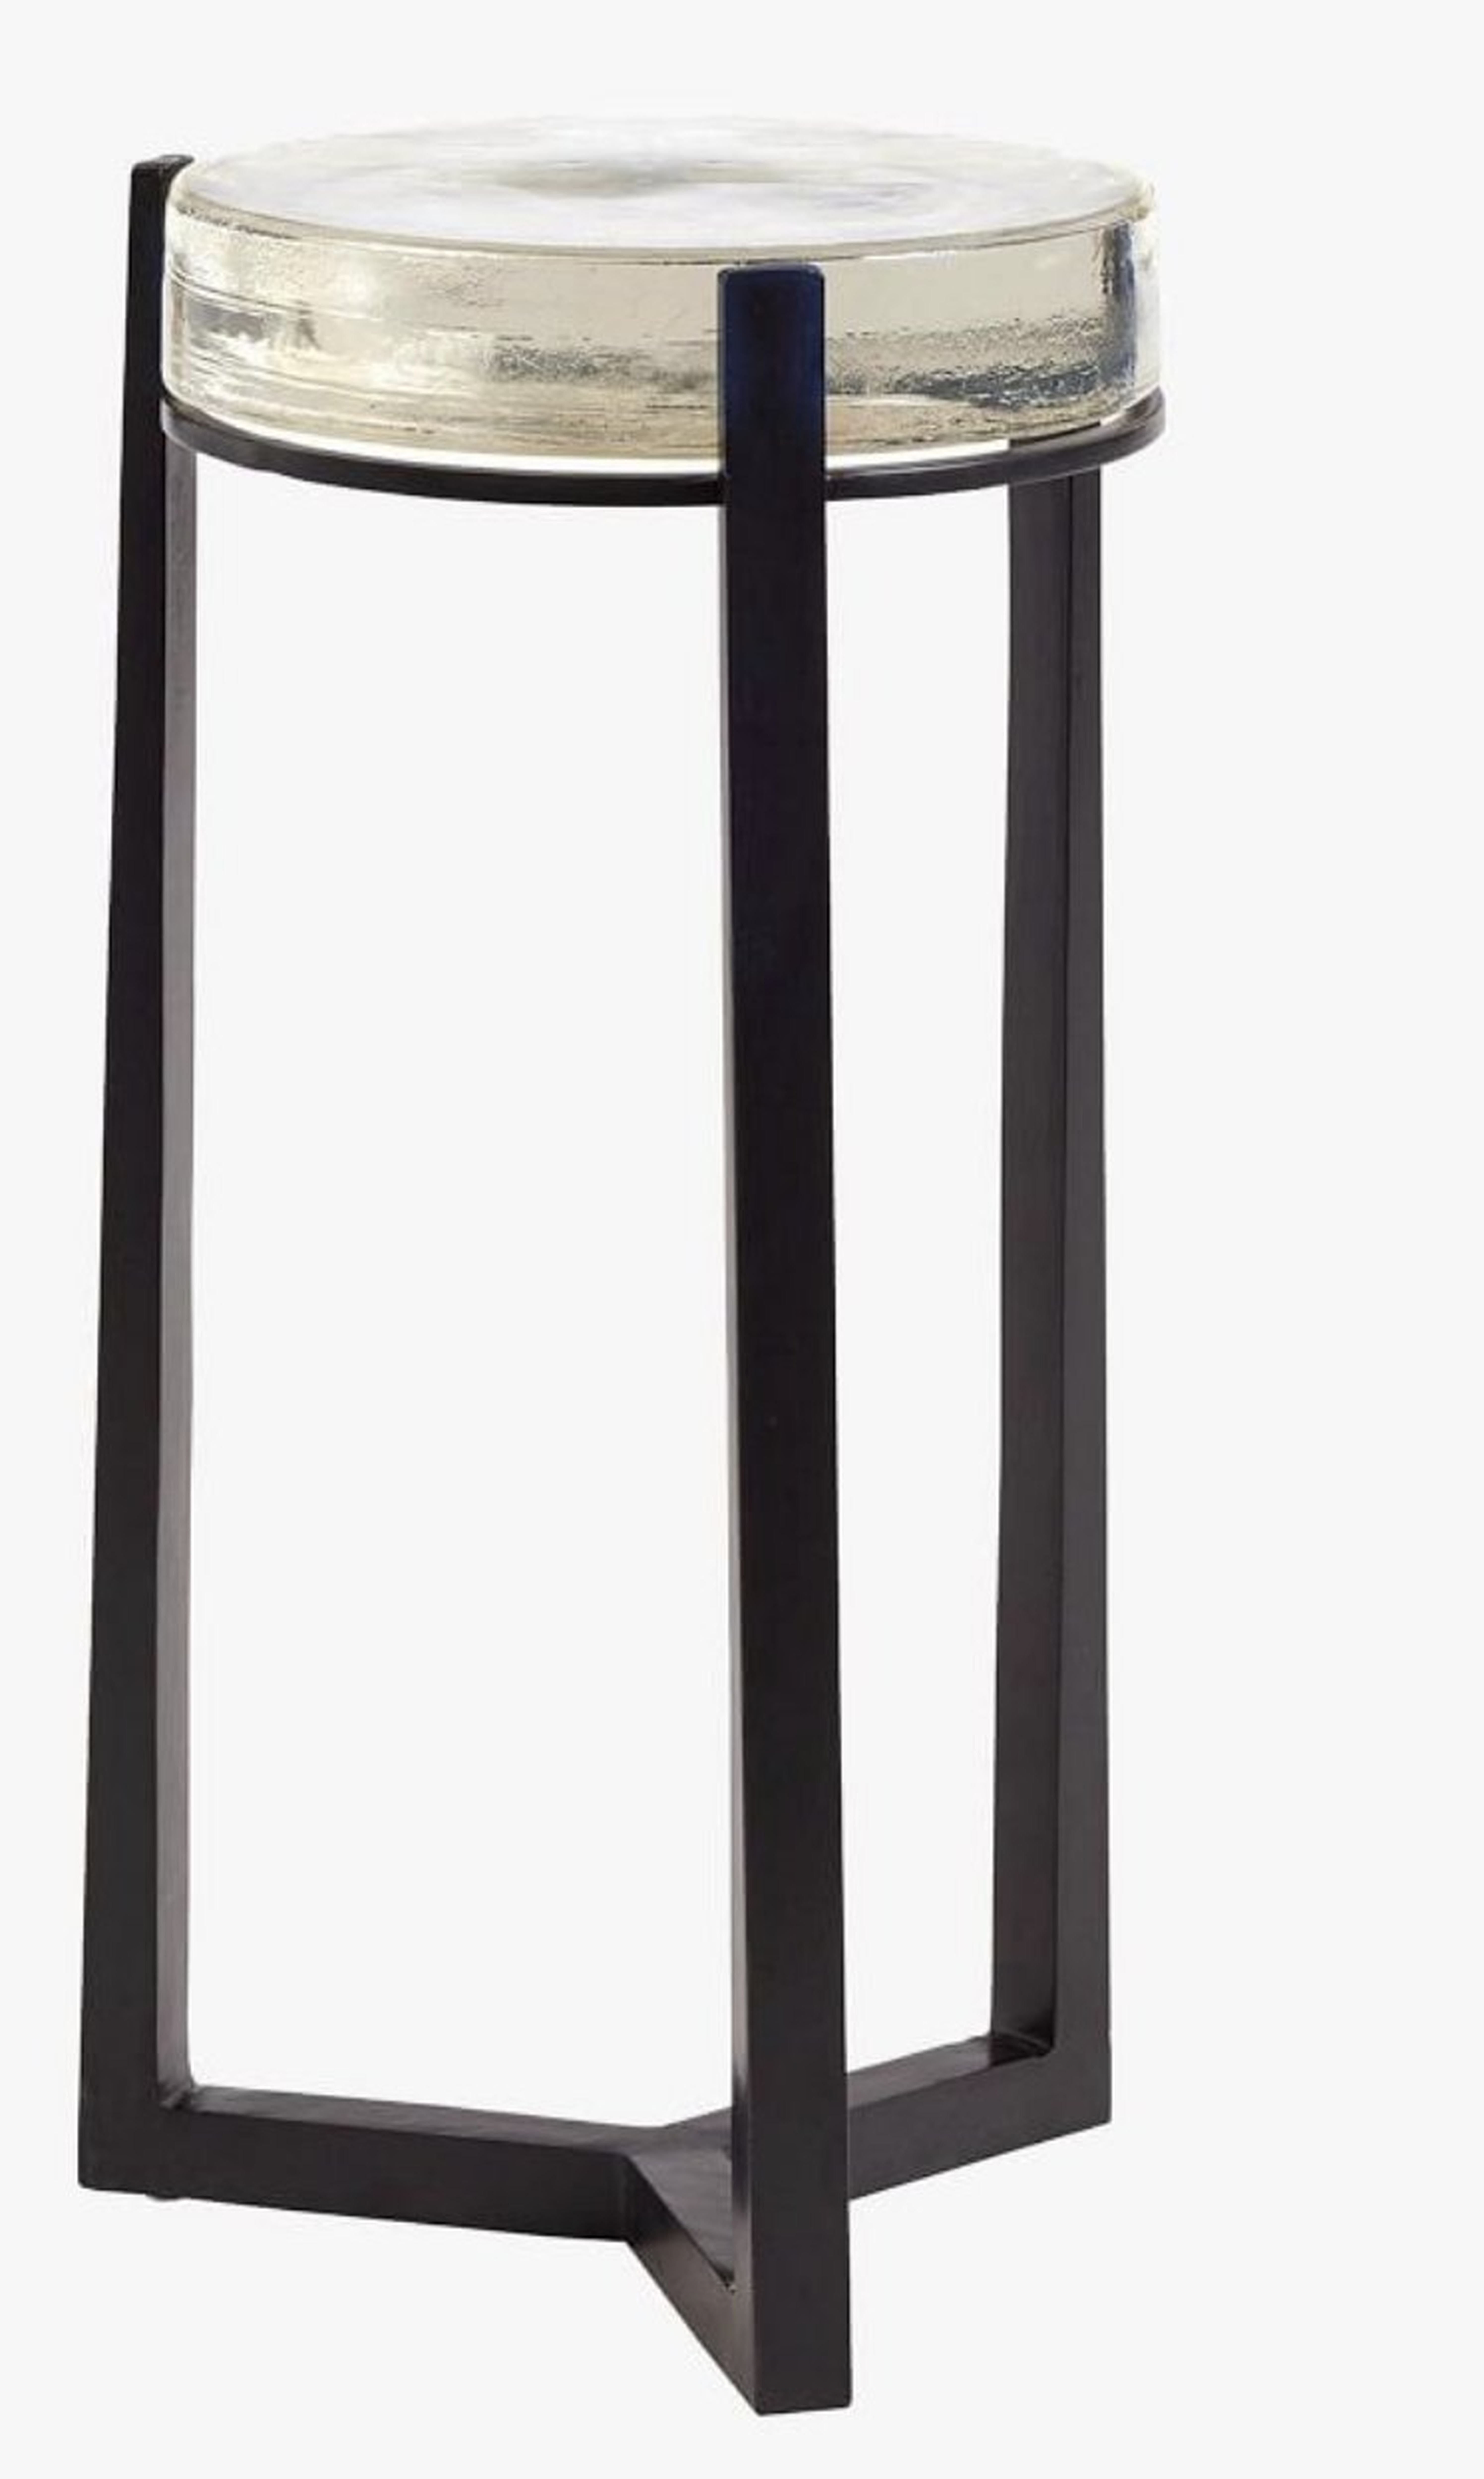 Cori 10" Round Accent Table, Recycled Clear Glass Top/Black Base - Pottery Barn